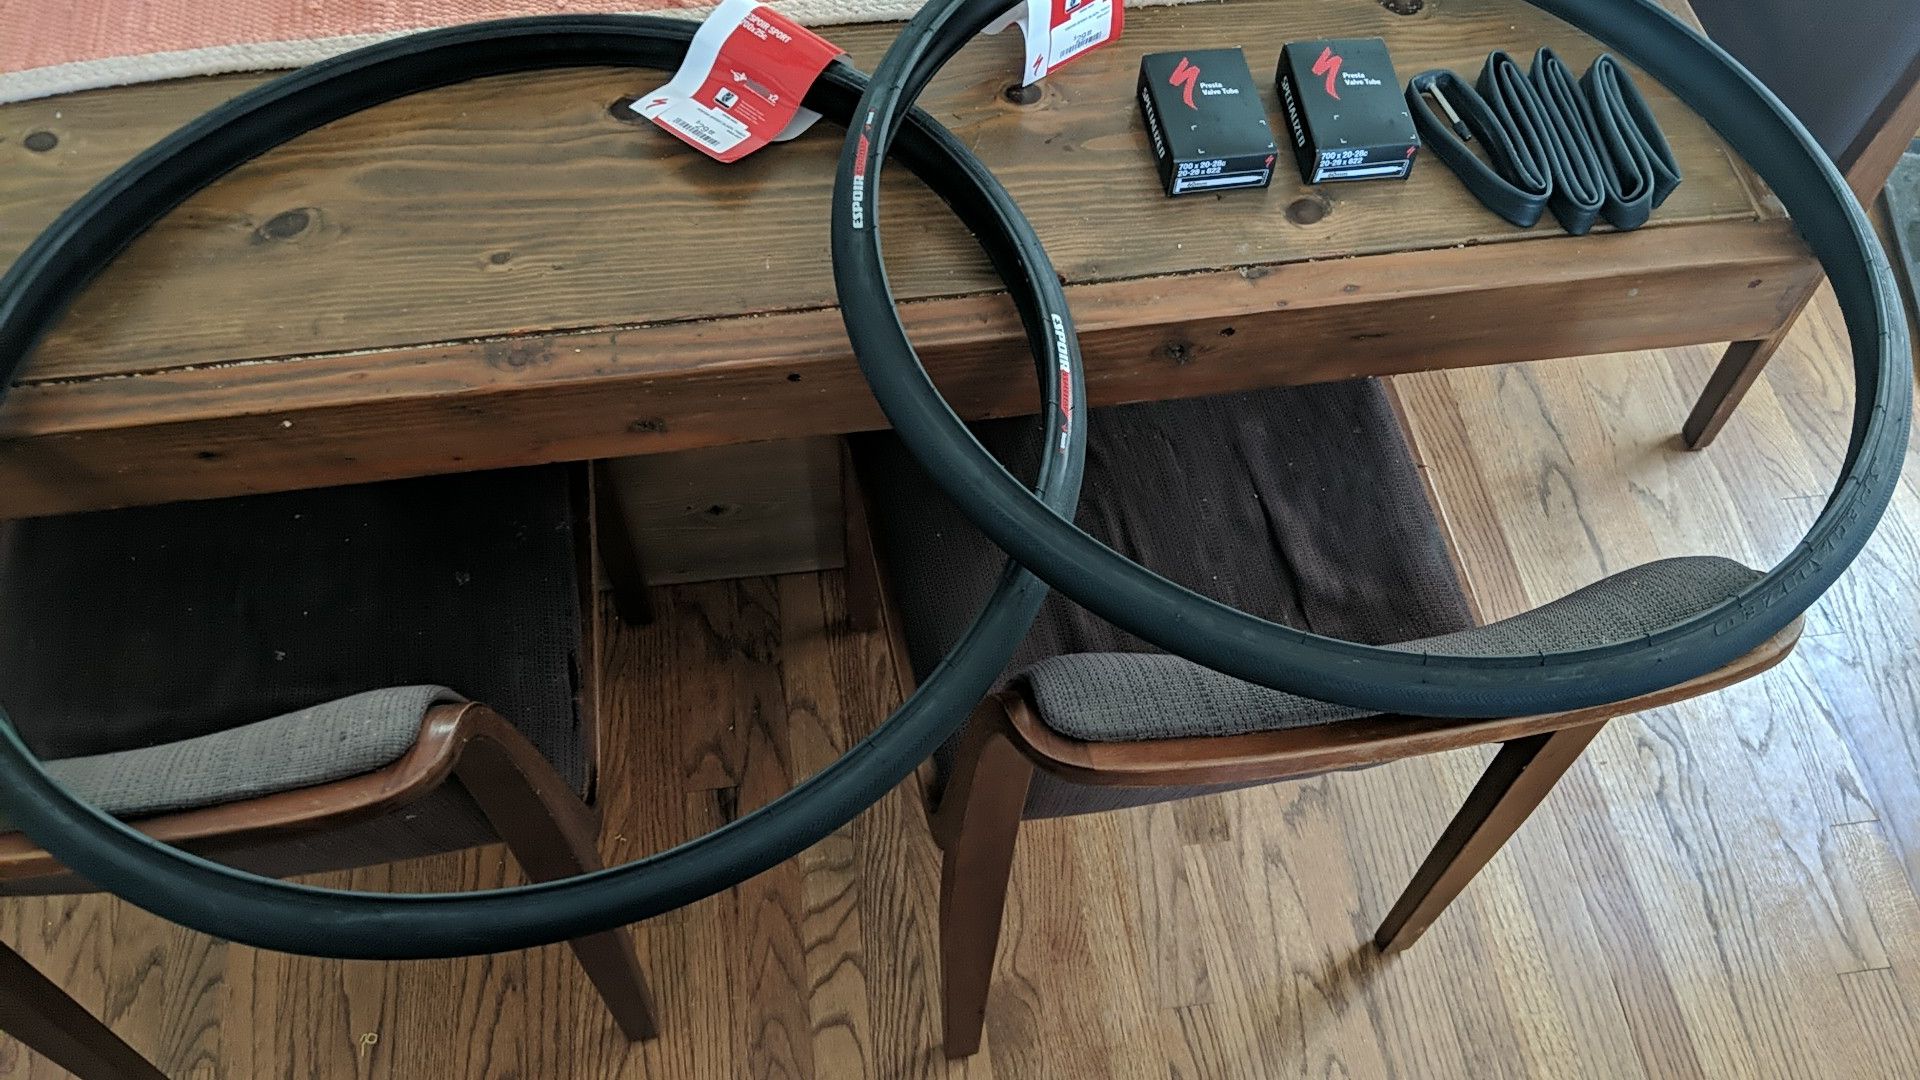 New Bike Tires and tubes - 700x25c